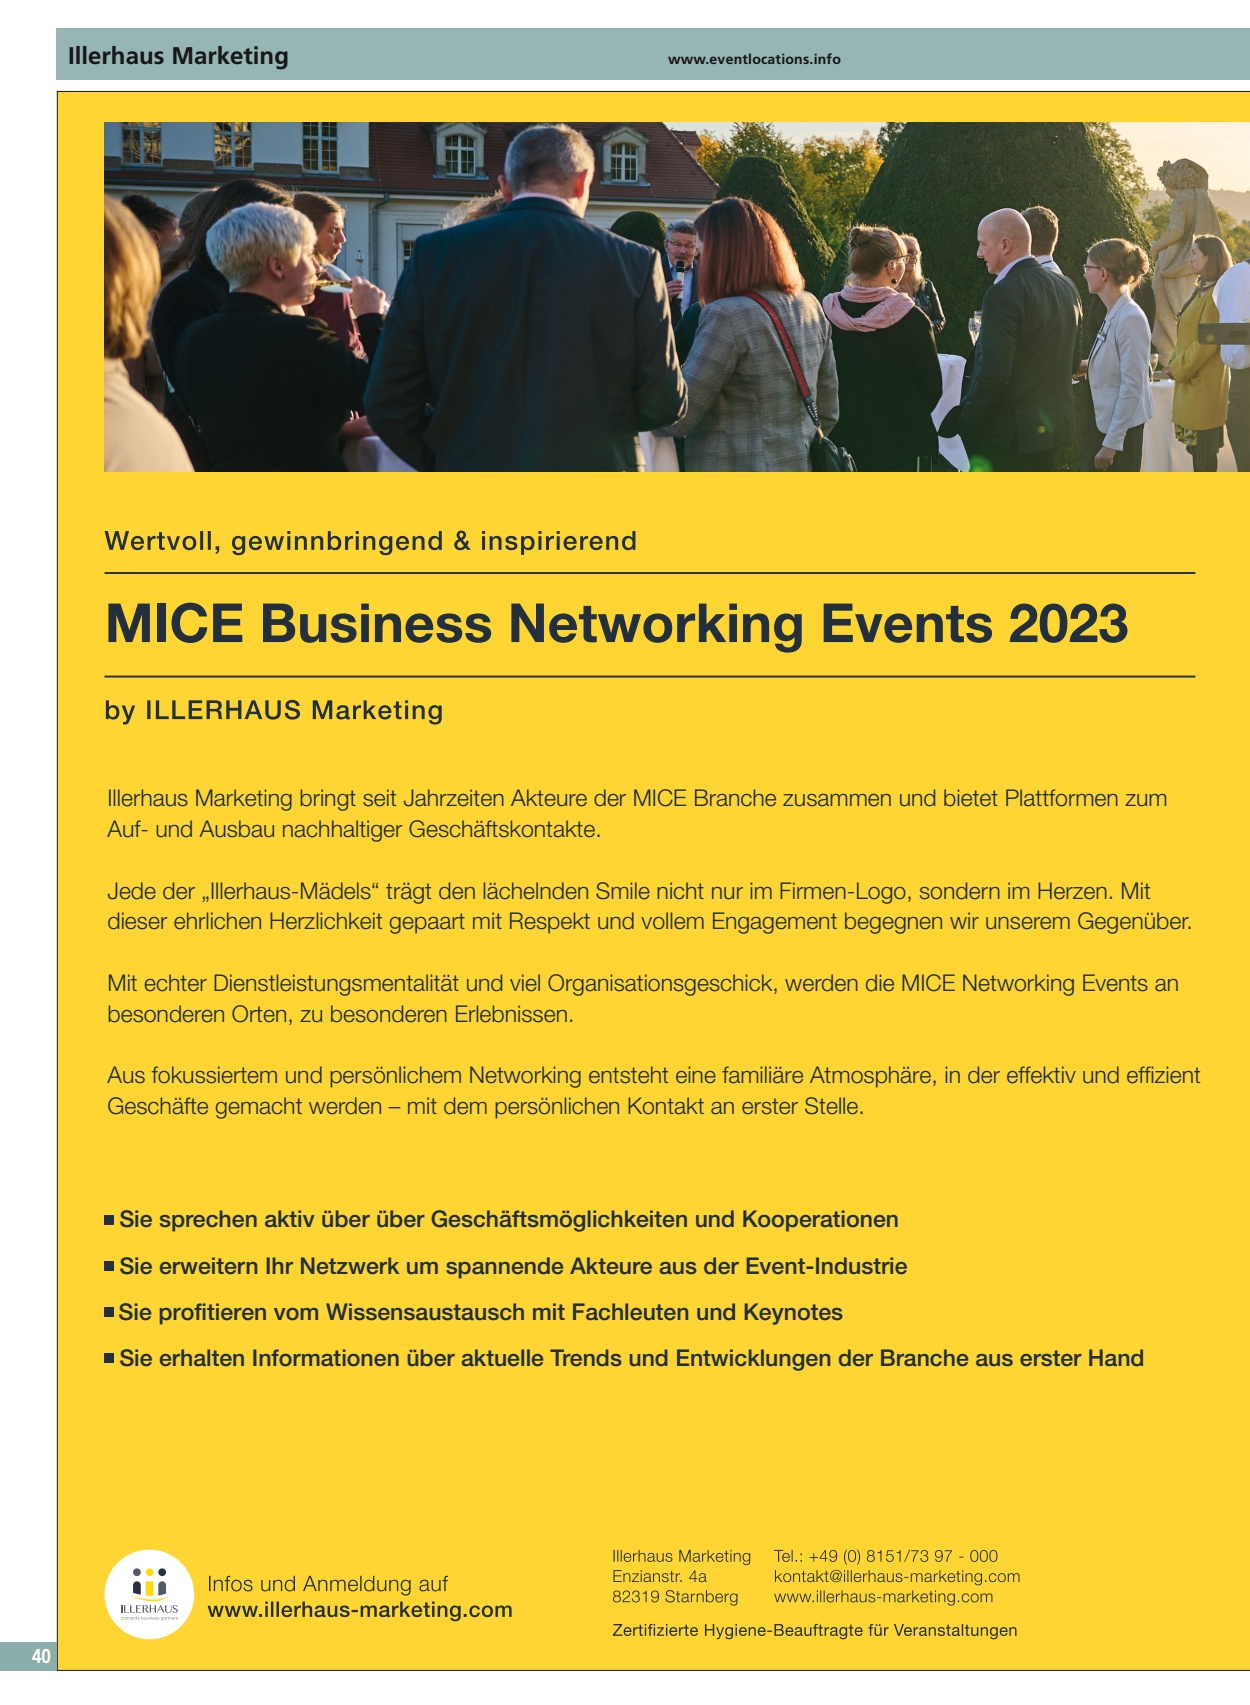 MICE Business Networking